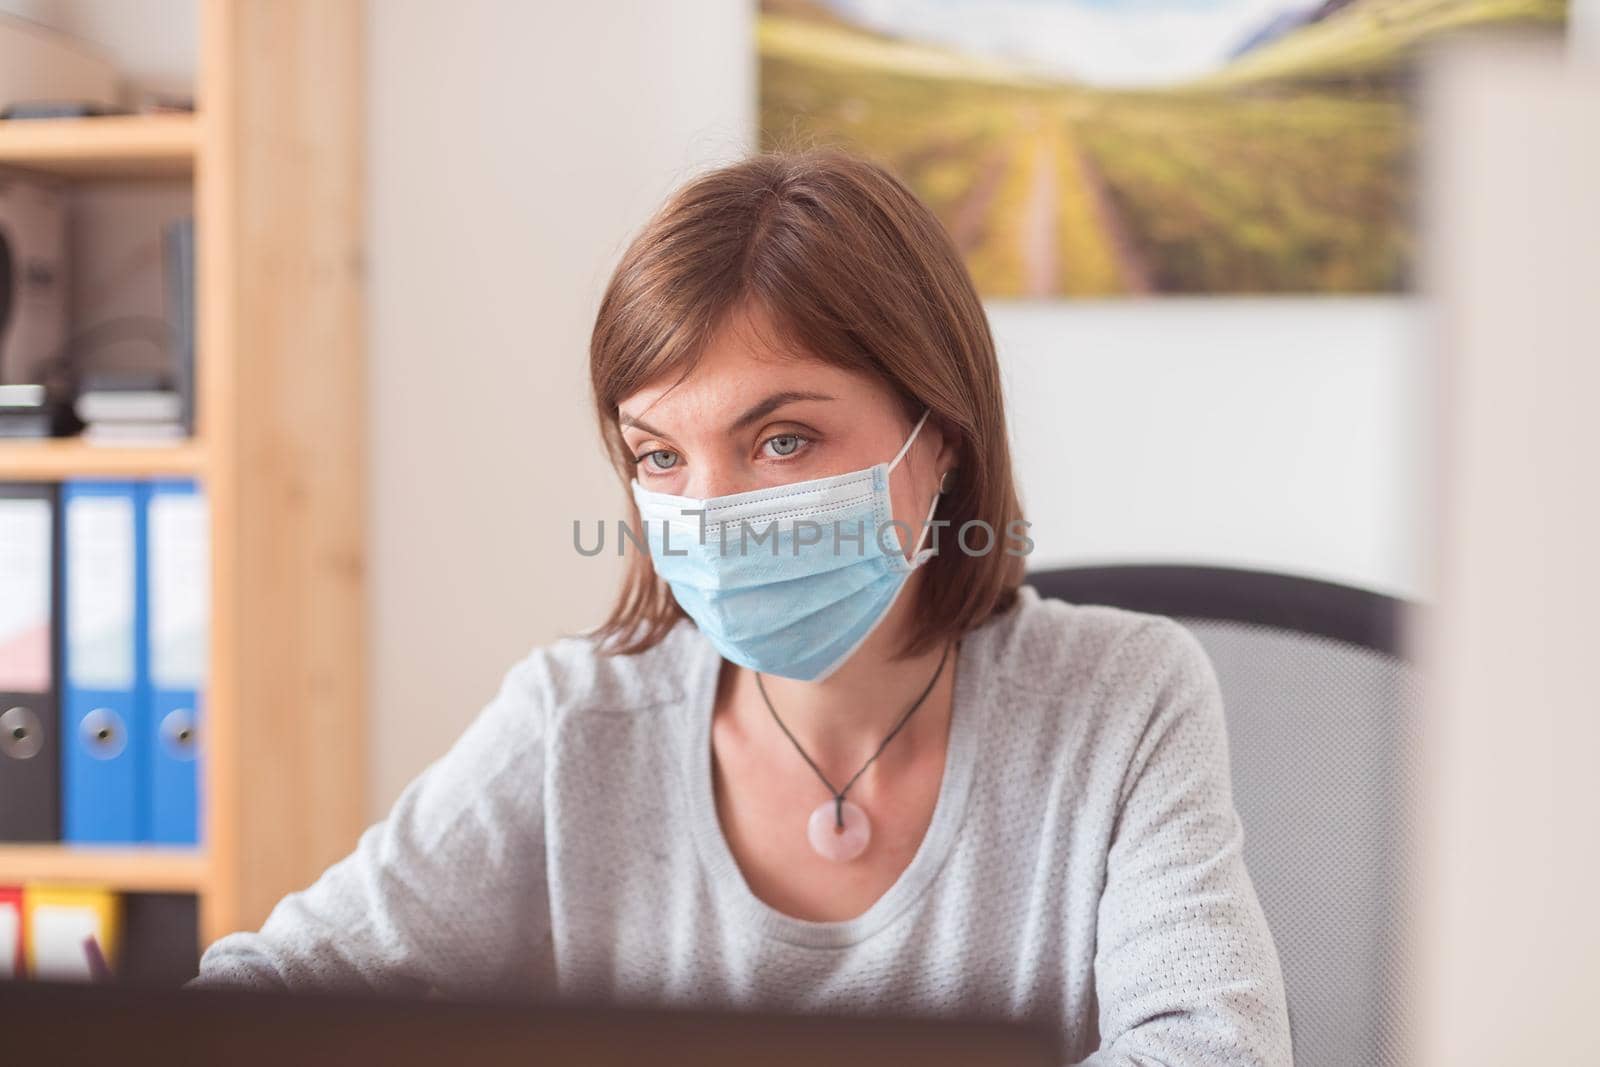 Protection in office in corona crisis: Woman with face mask is sitting on his workplace by Daxenbichler